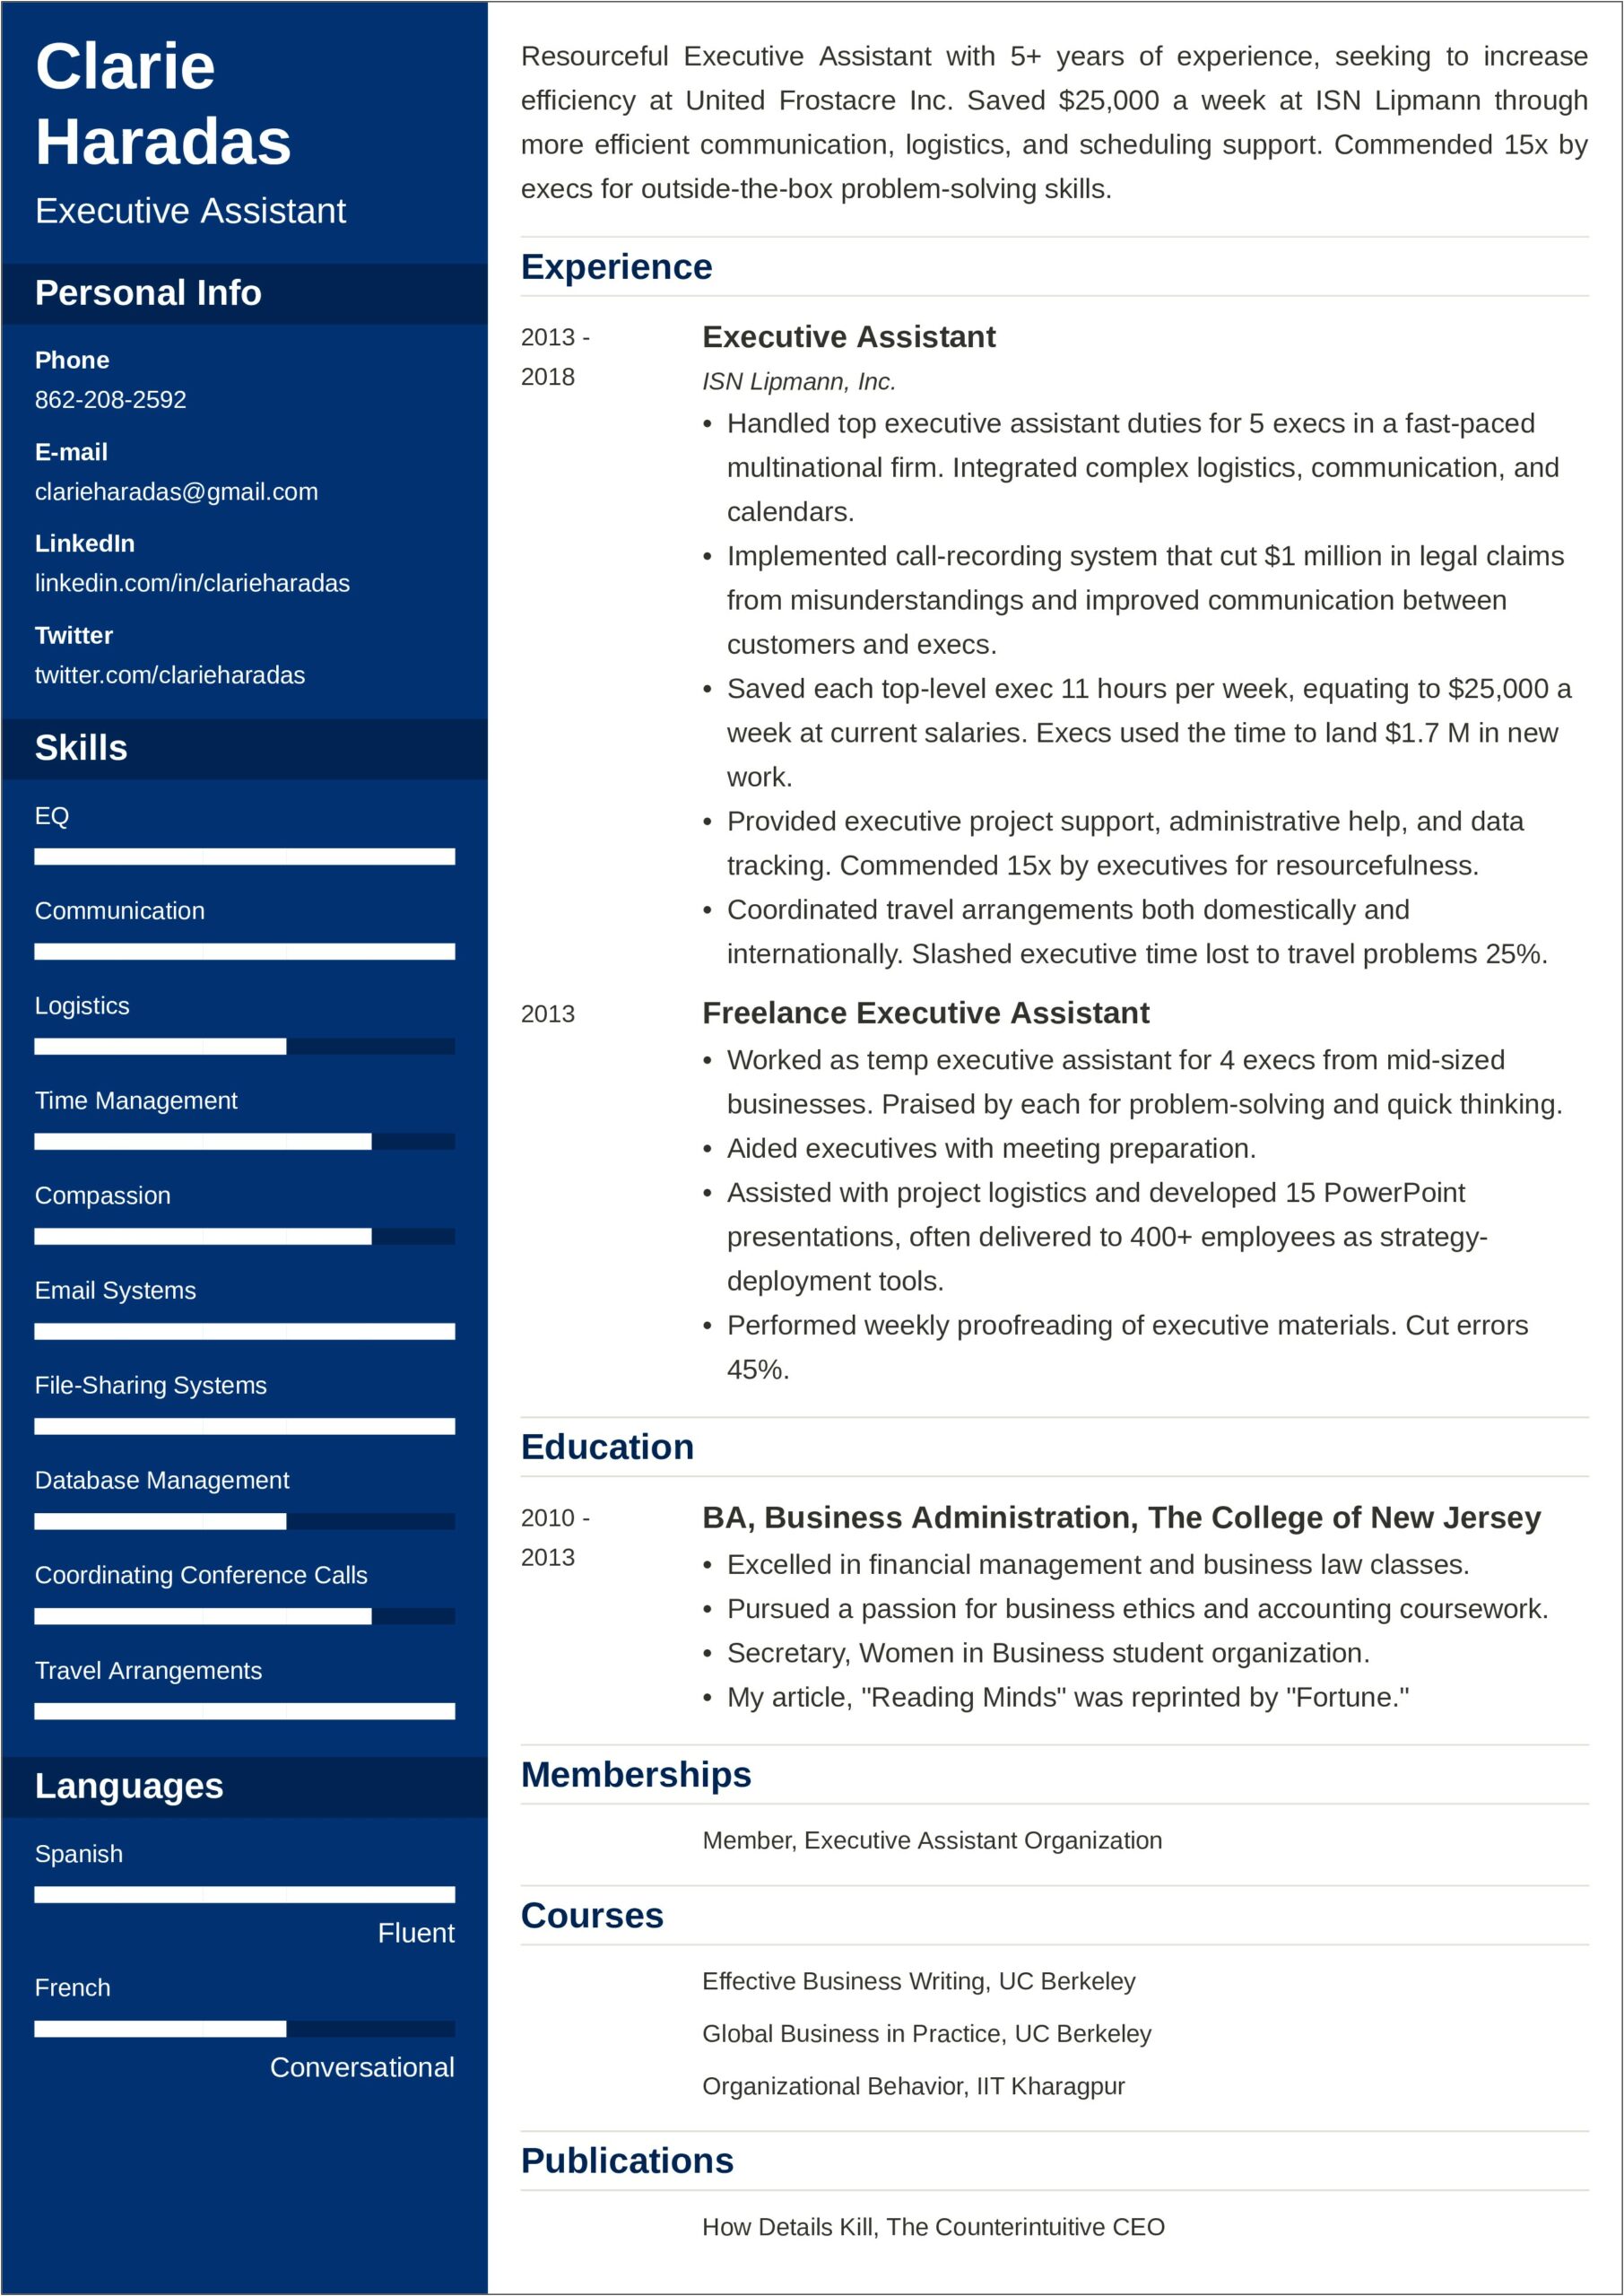 Listing Multiple Schools On Your Resume